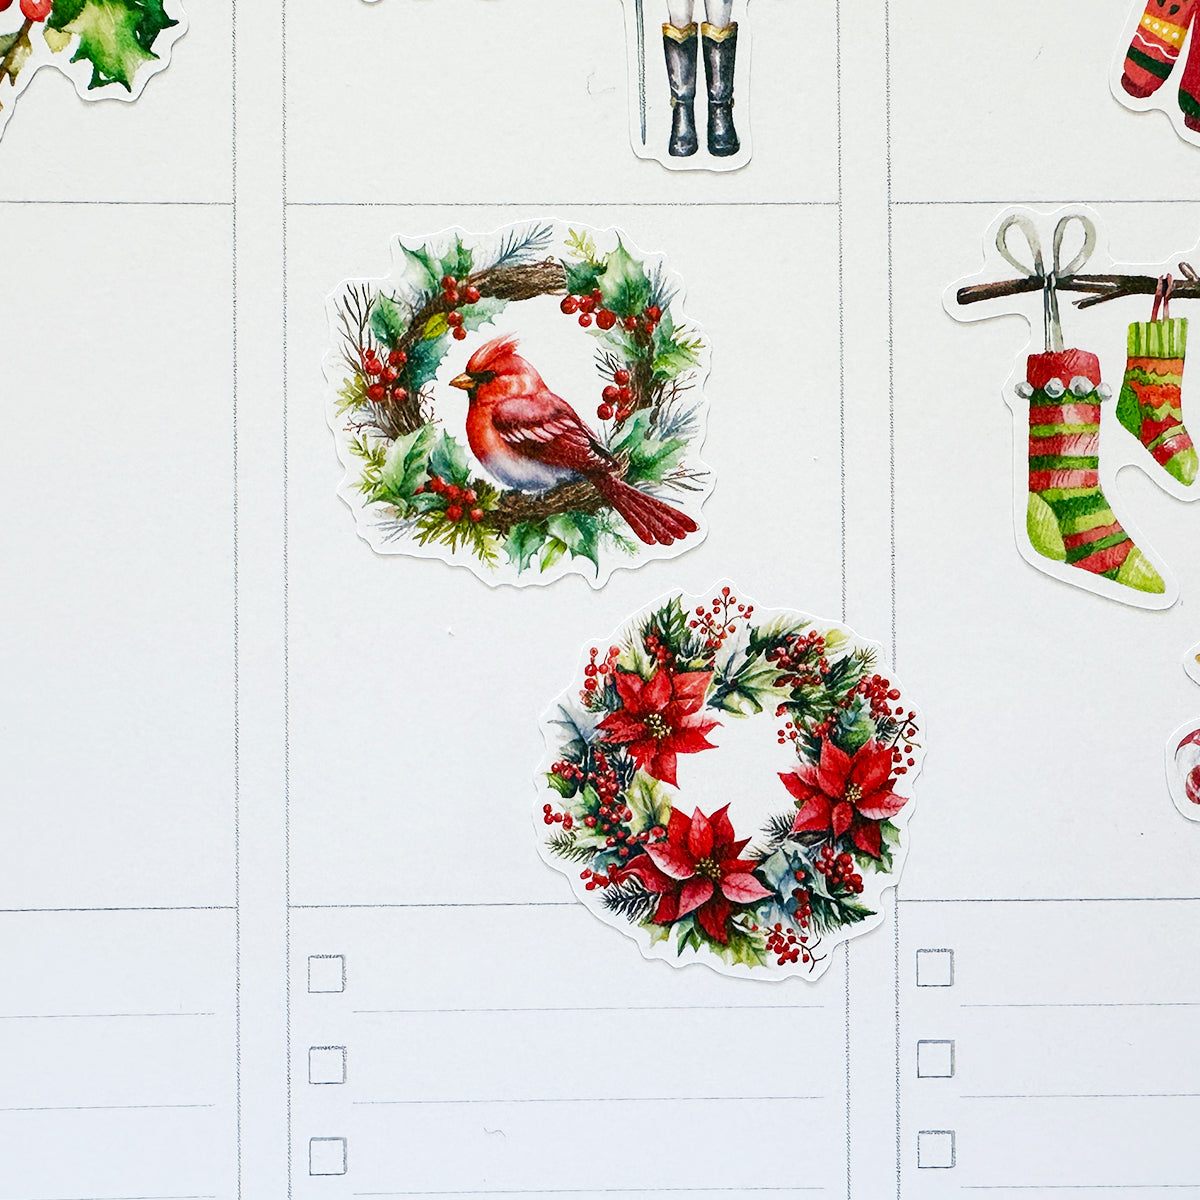 Christmas Florals and Finches Planner Stickers by Closet Planner Addict (S-699)